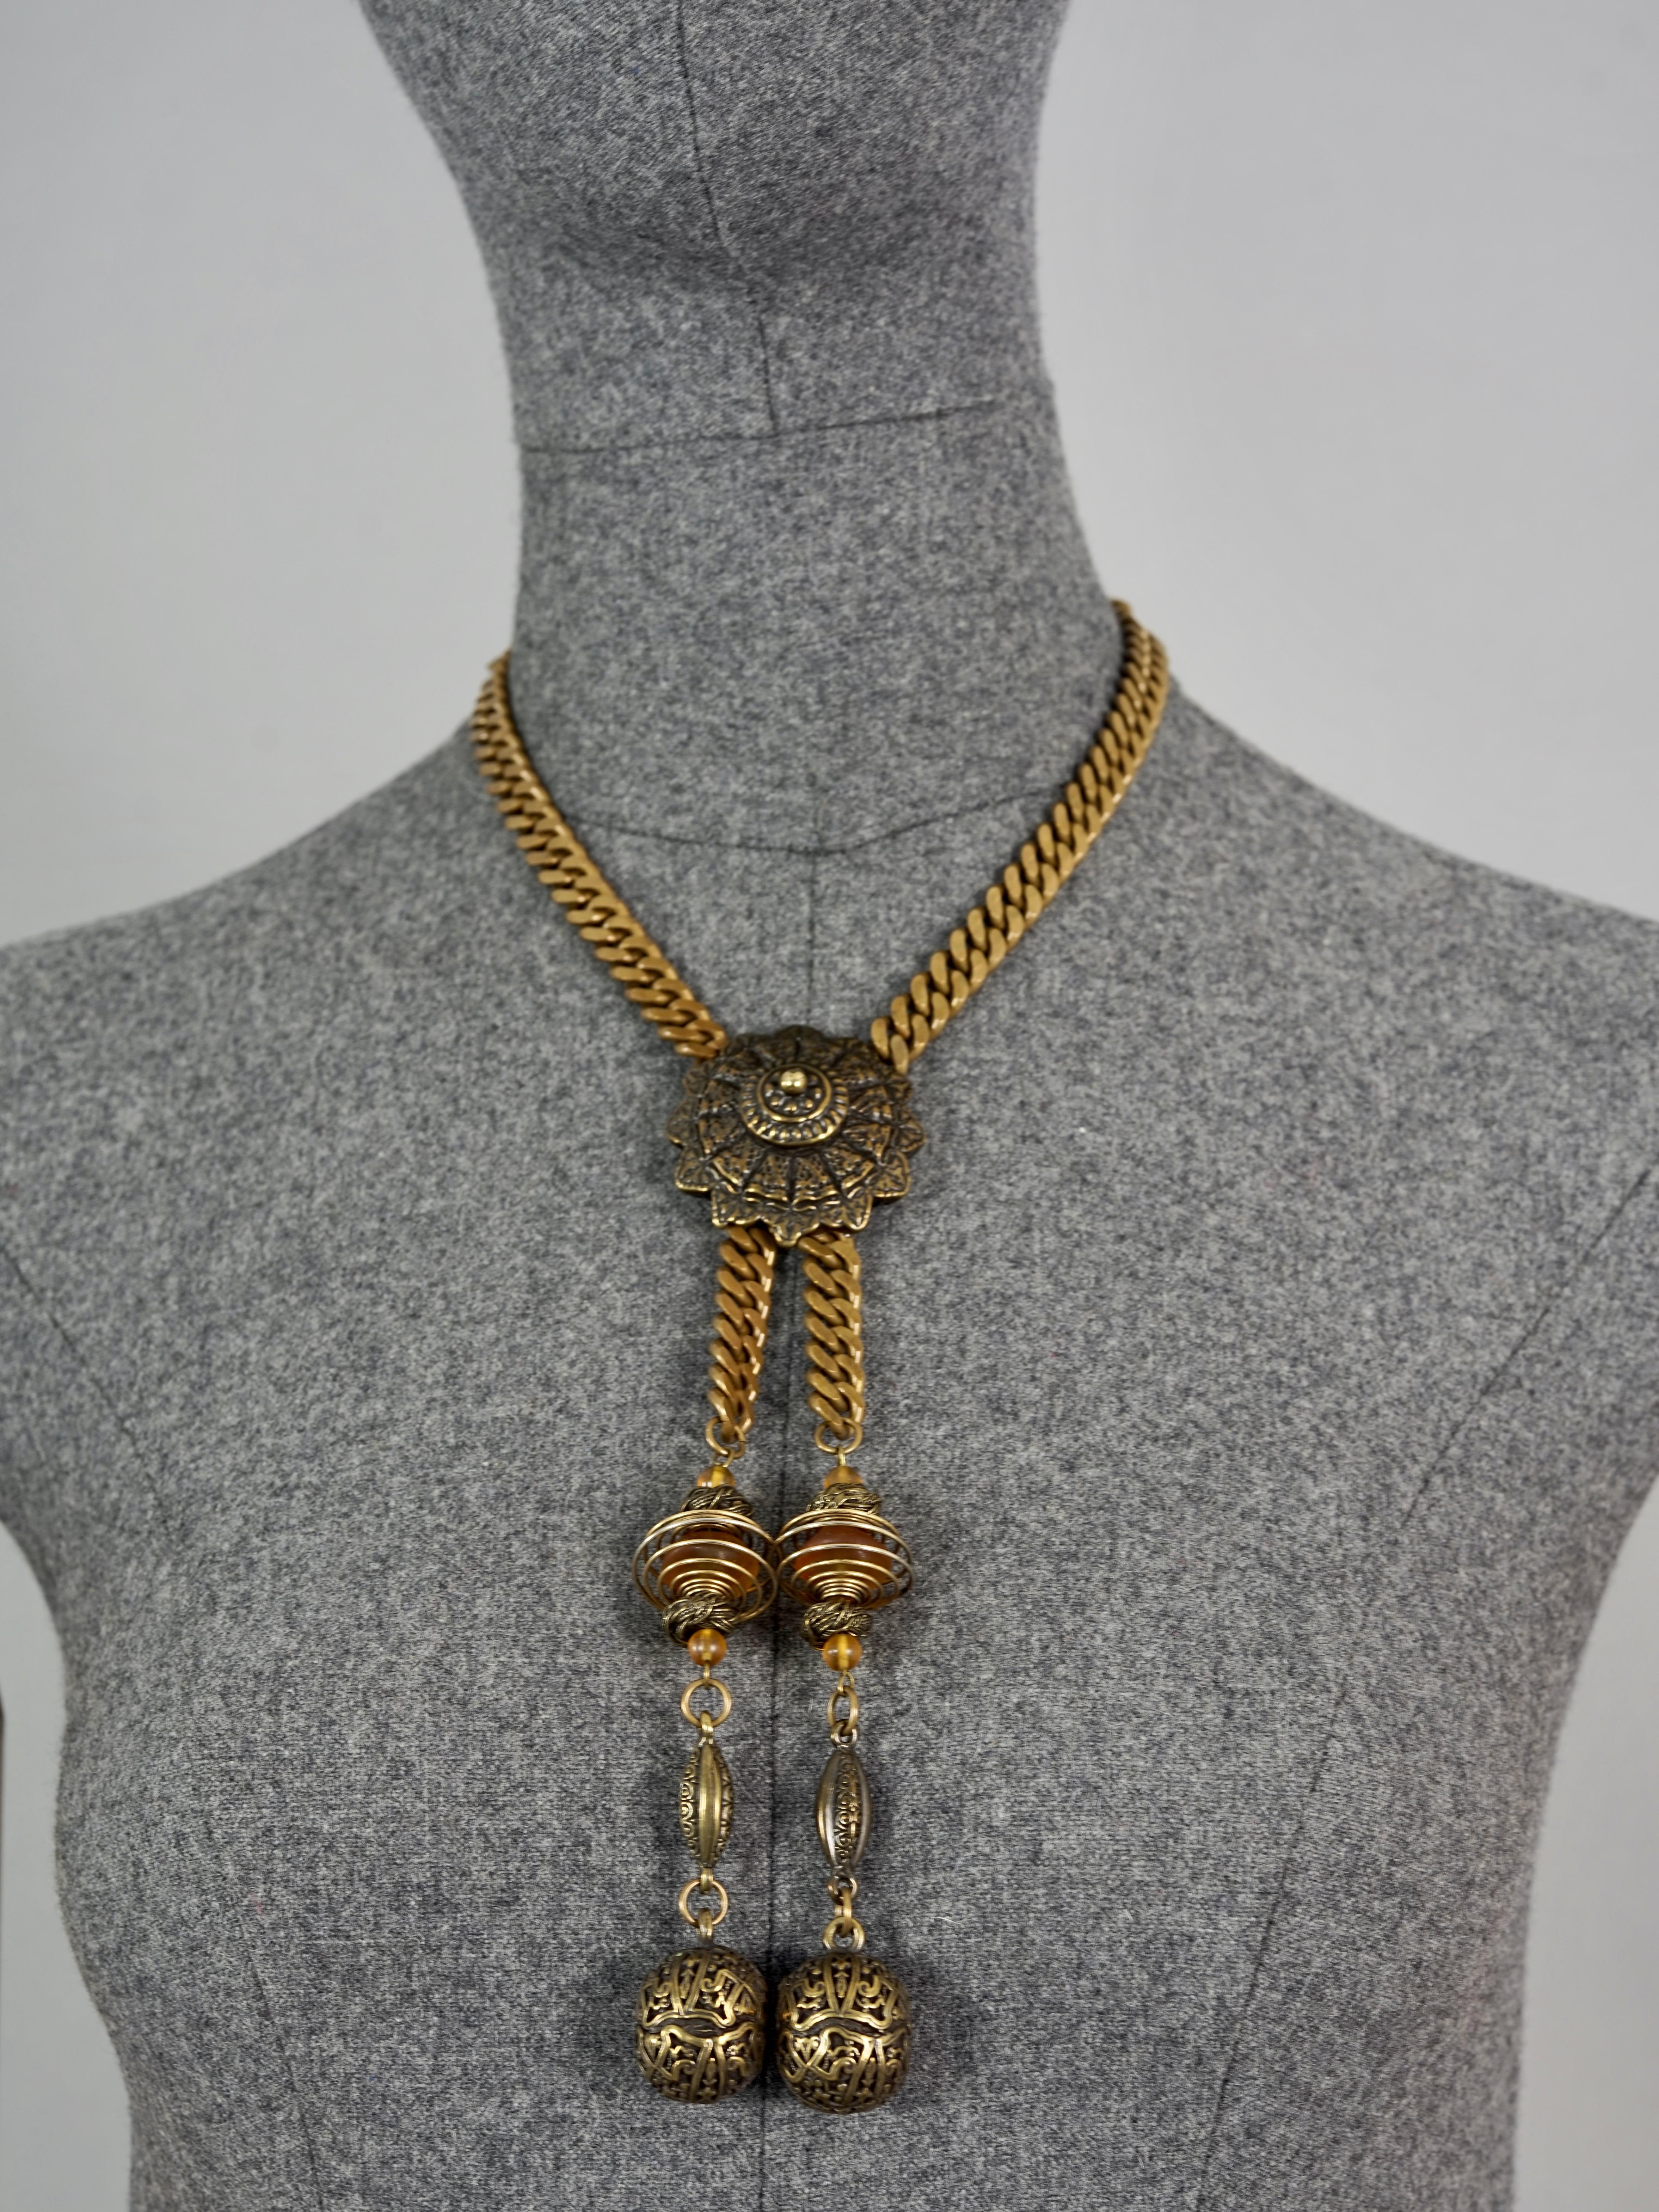 Vintage JEAN PAUL GAULTIER Brutalist Tribal Coil Charm Necklace

Measurements:
Pendant Drop: 7.48 inches (19 cms)
Wearable Length: 16.92 inches (43 cm)

Features:
- 100% Authentic JEAN PAUL GAULTIER.
- Brutalist/ Tribal style necklace.
- Toggle